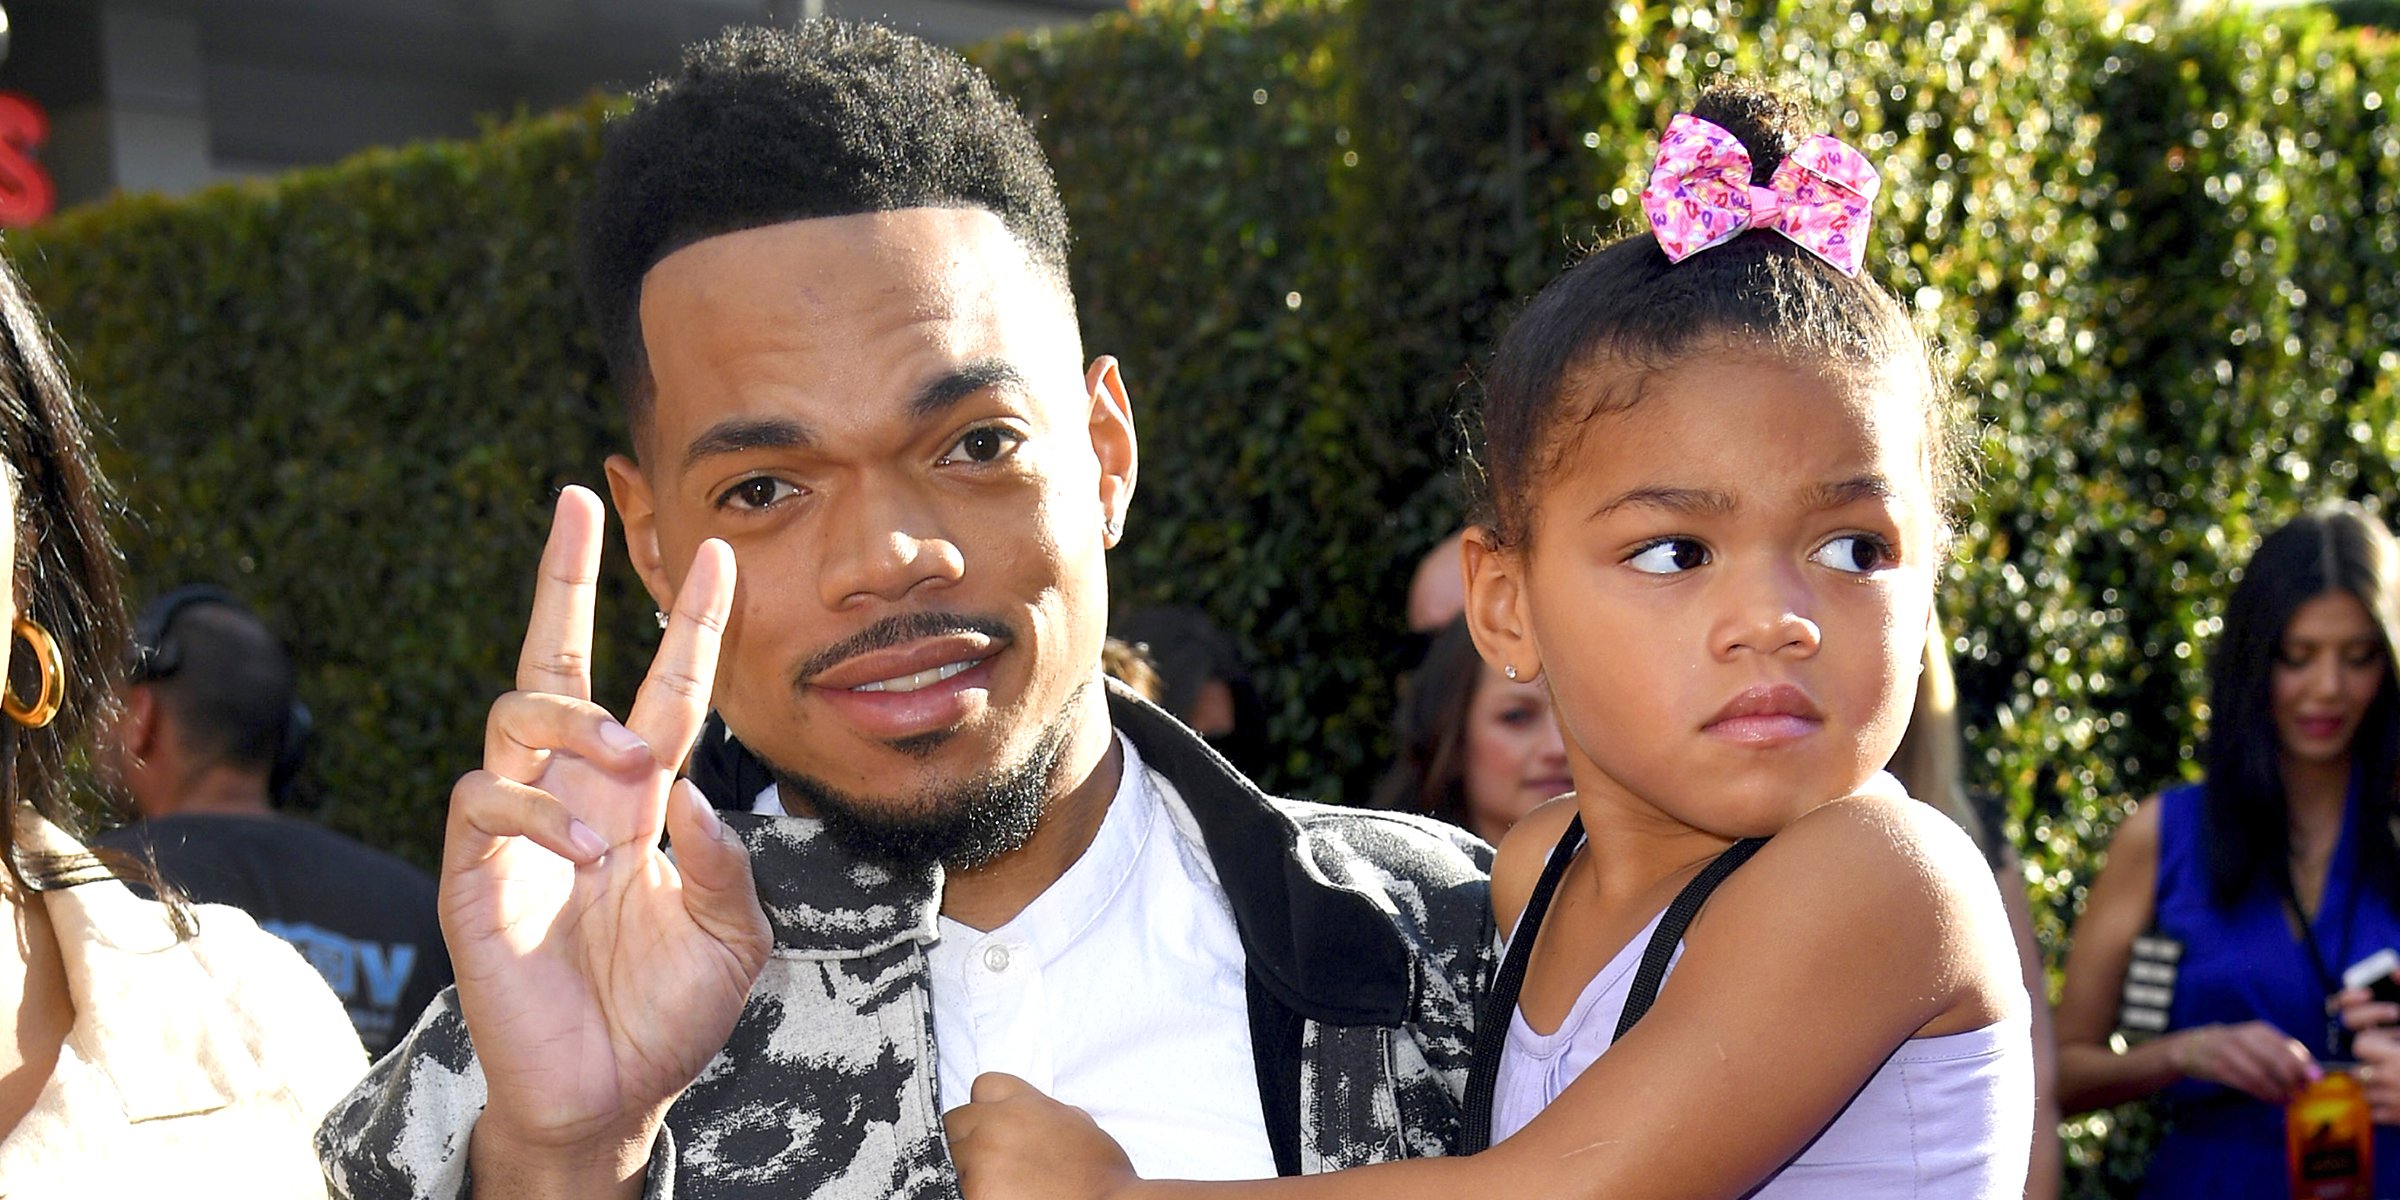 Chance the Rapper and his daughter, Kensli Bennett. | Source: Getty Images